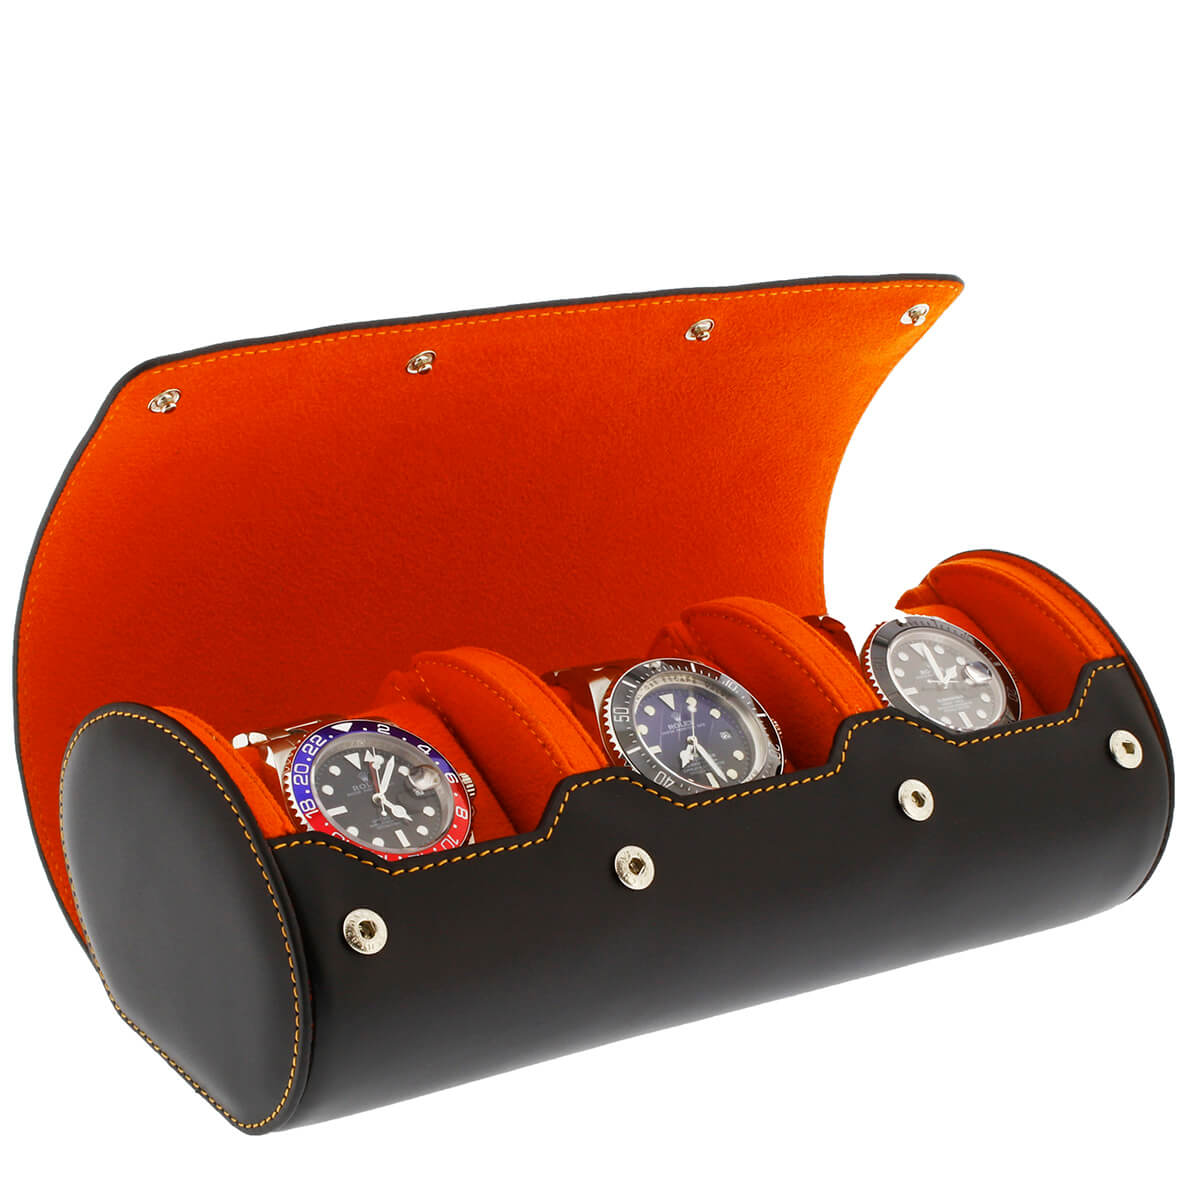 Triple Watch Roll Case Premium Black Nappa Leather with Orange Lining by Aevitas